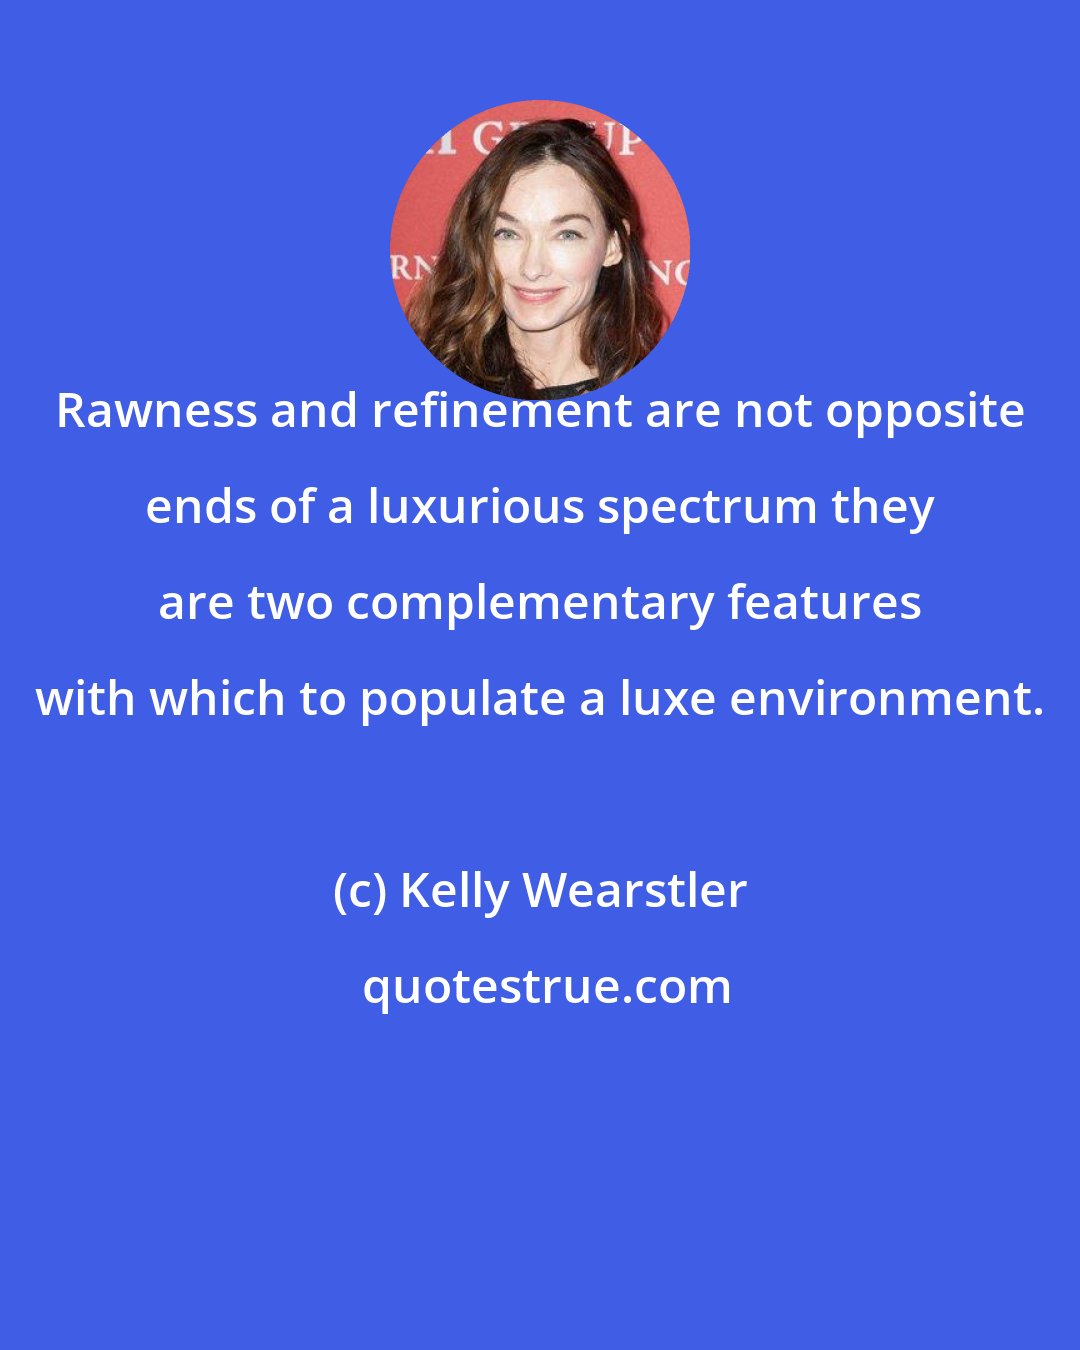 Kelly Wearstler: Rawness and refinement are not opposite ends of a luxurious spectrum they are two complementary features with which to populate a luxe environment.